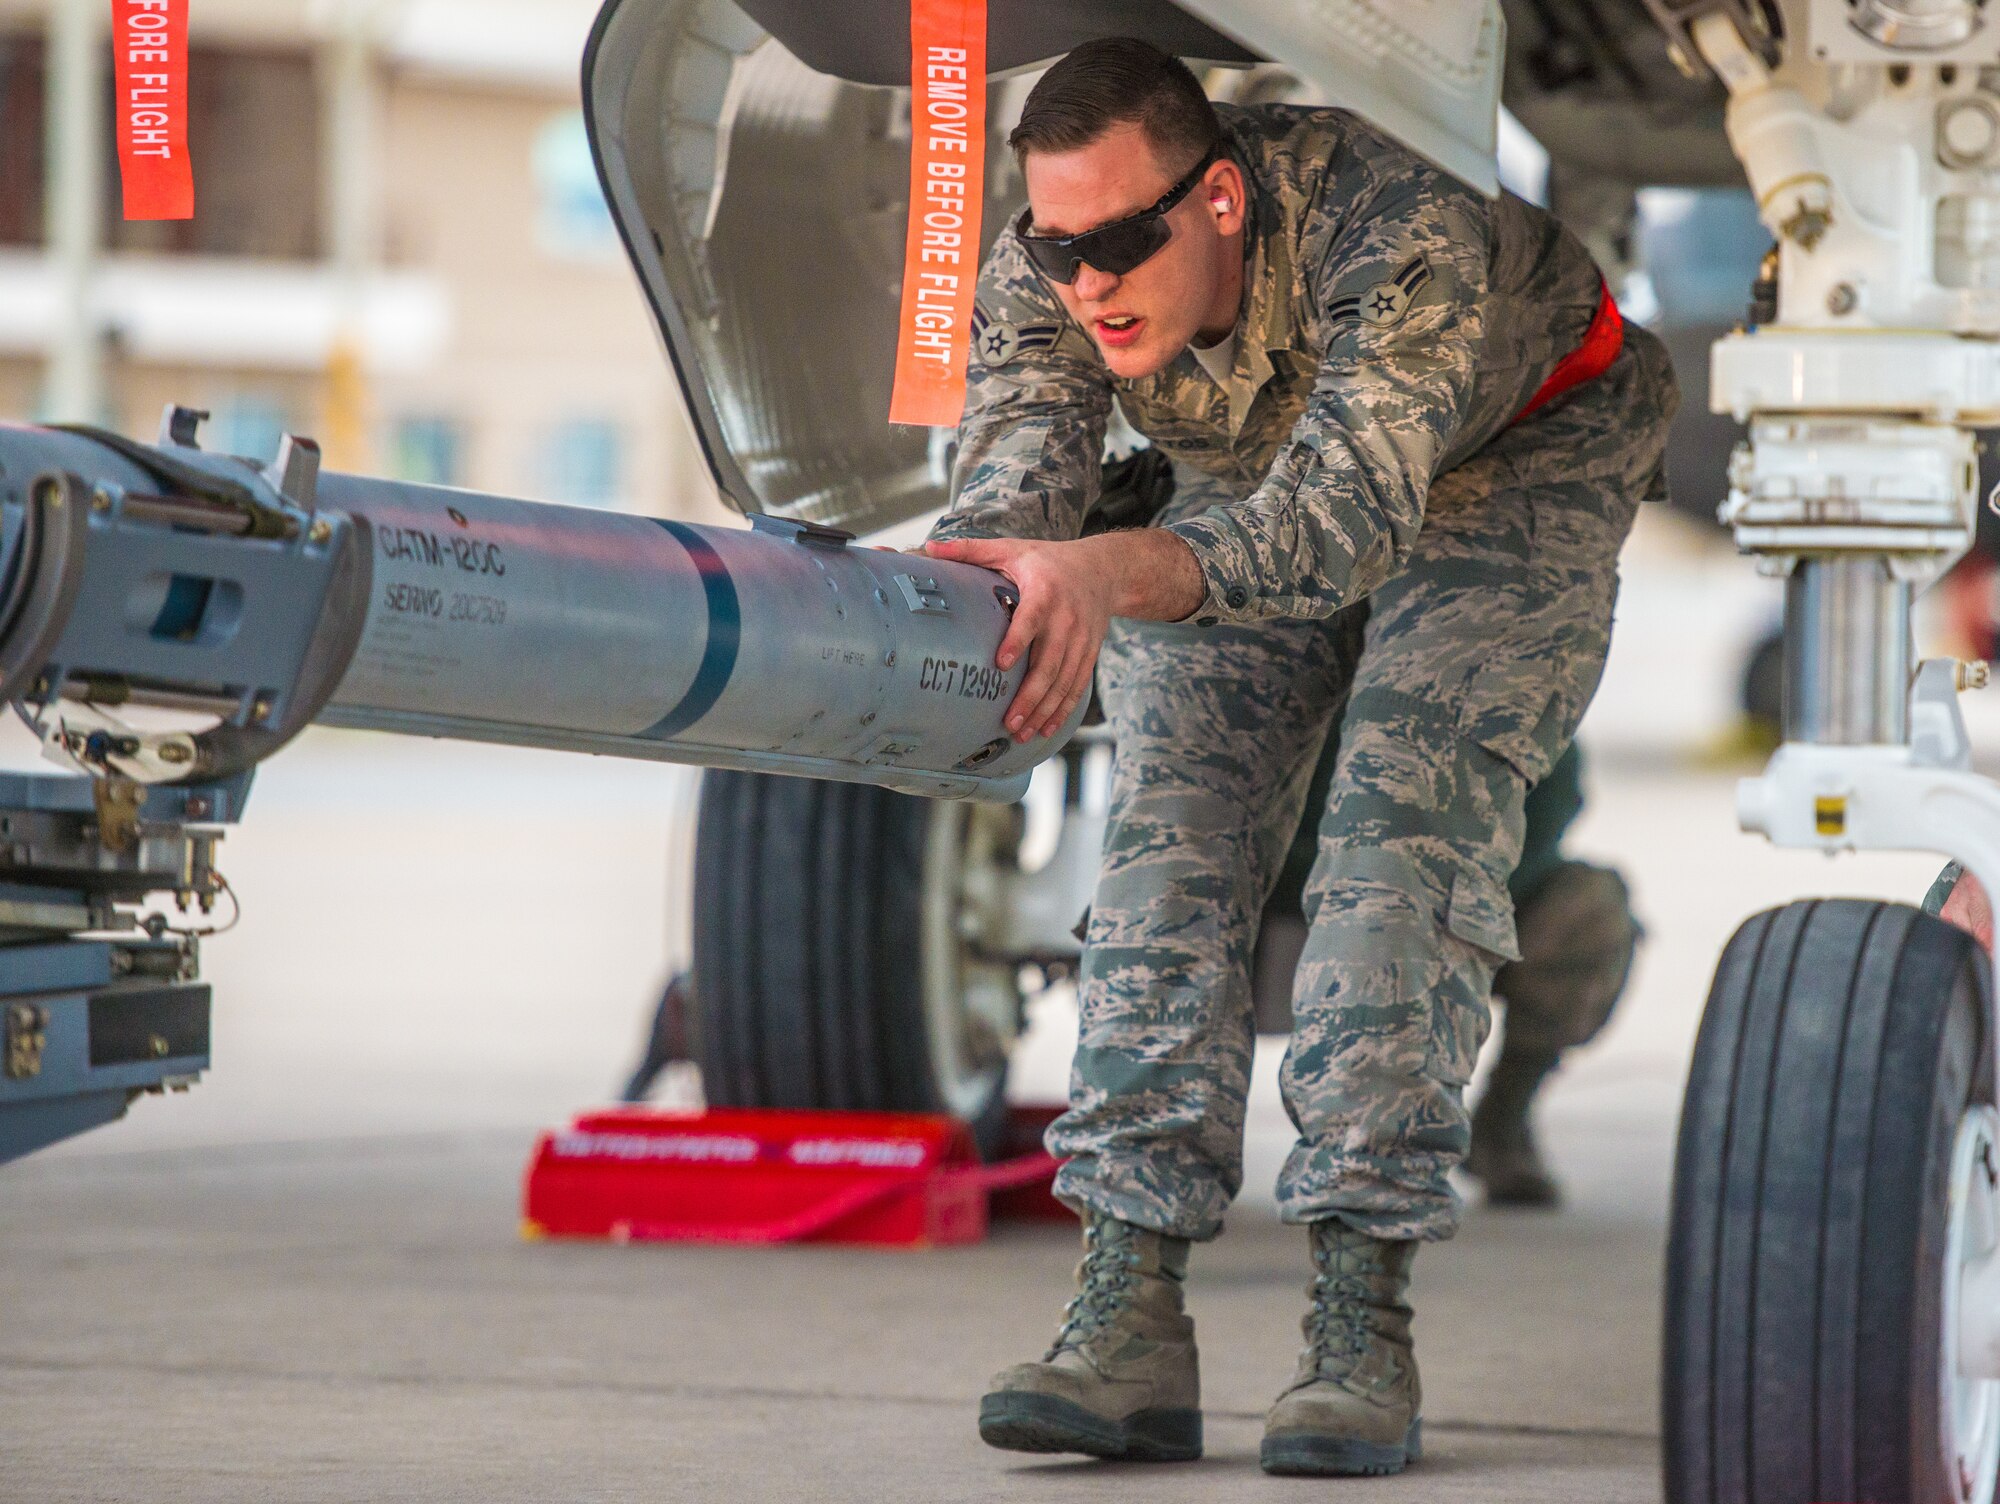 Airman 1st Class Dillin Mattos, 63rd Aircraft Maintenance Unit load crew team member, guides an inert missile tonto an F-35A Lightning II during the 56th Fighter Wing Quarterly Load Crew Competition at Luke Air Force Base, Ariz., Jan. 10, 2019.